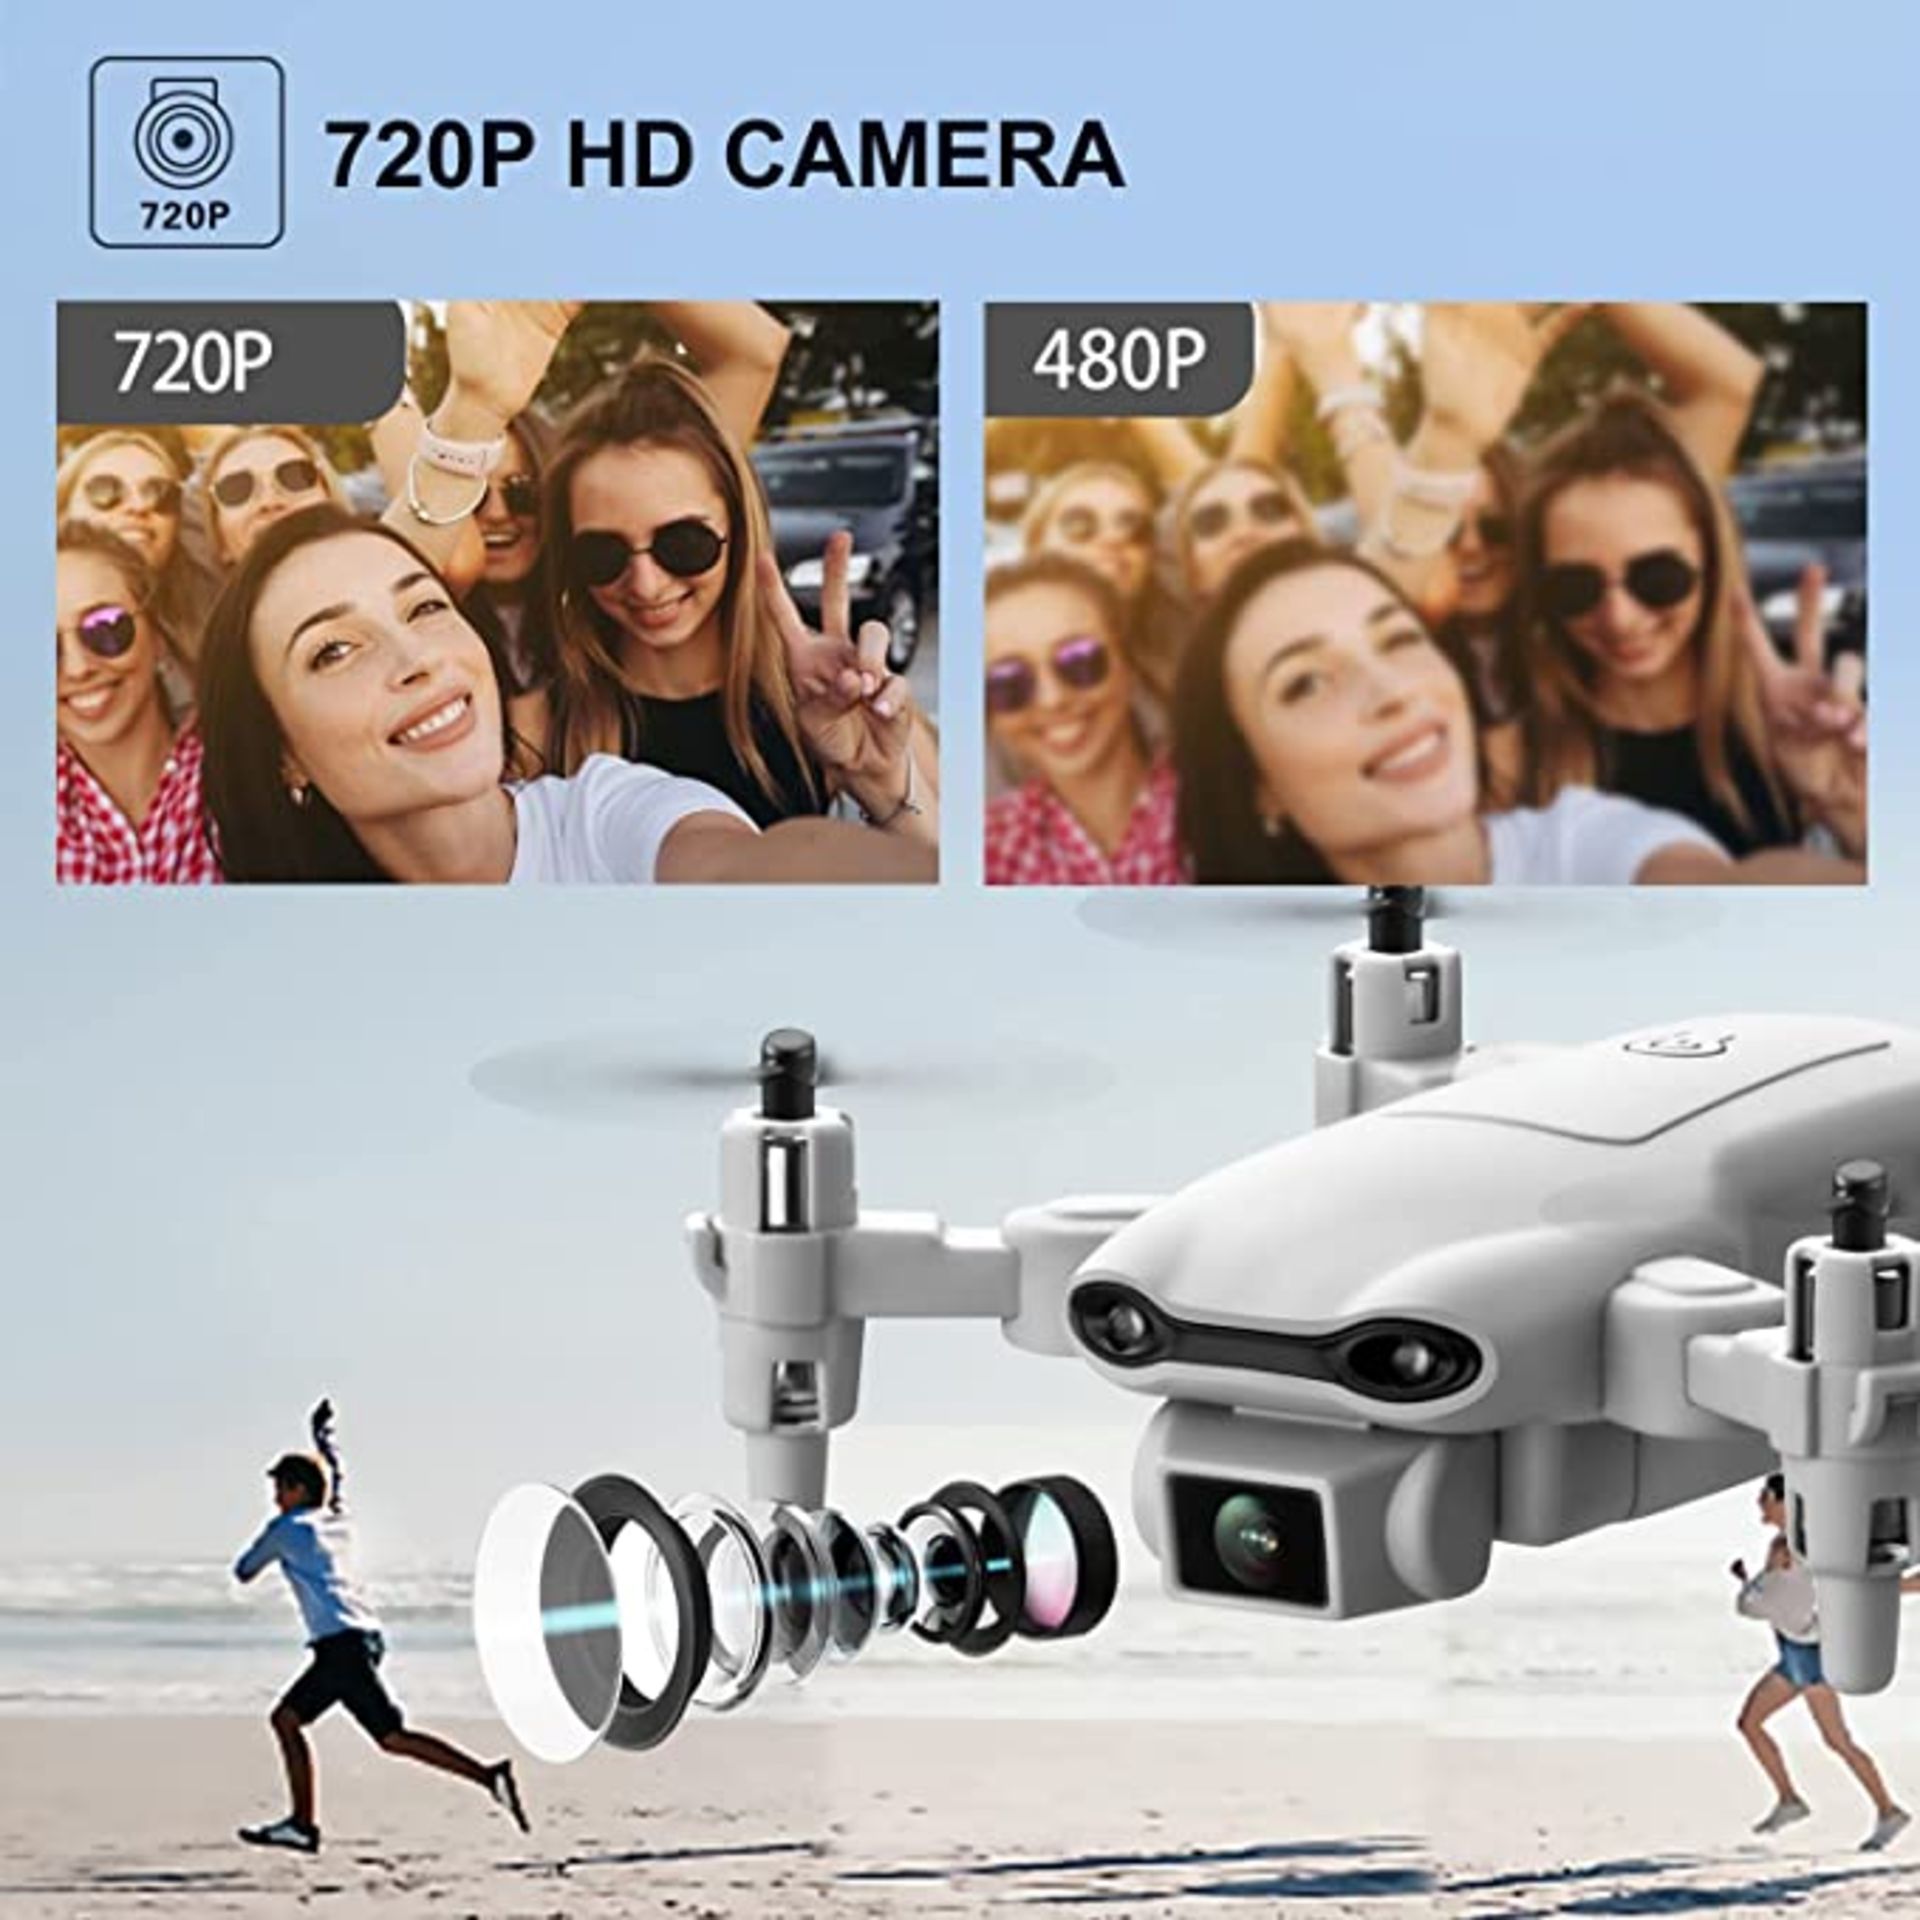 3 x 4DRC V9 Mini Drone for Kids with 720P HD FPV Camera, Foldable RC Quarcopter for Boys Girls - Image 2 of 2